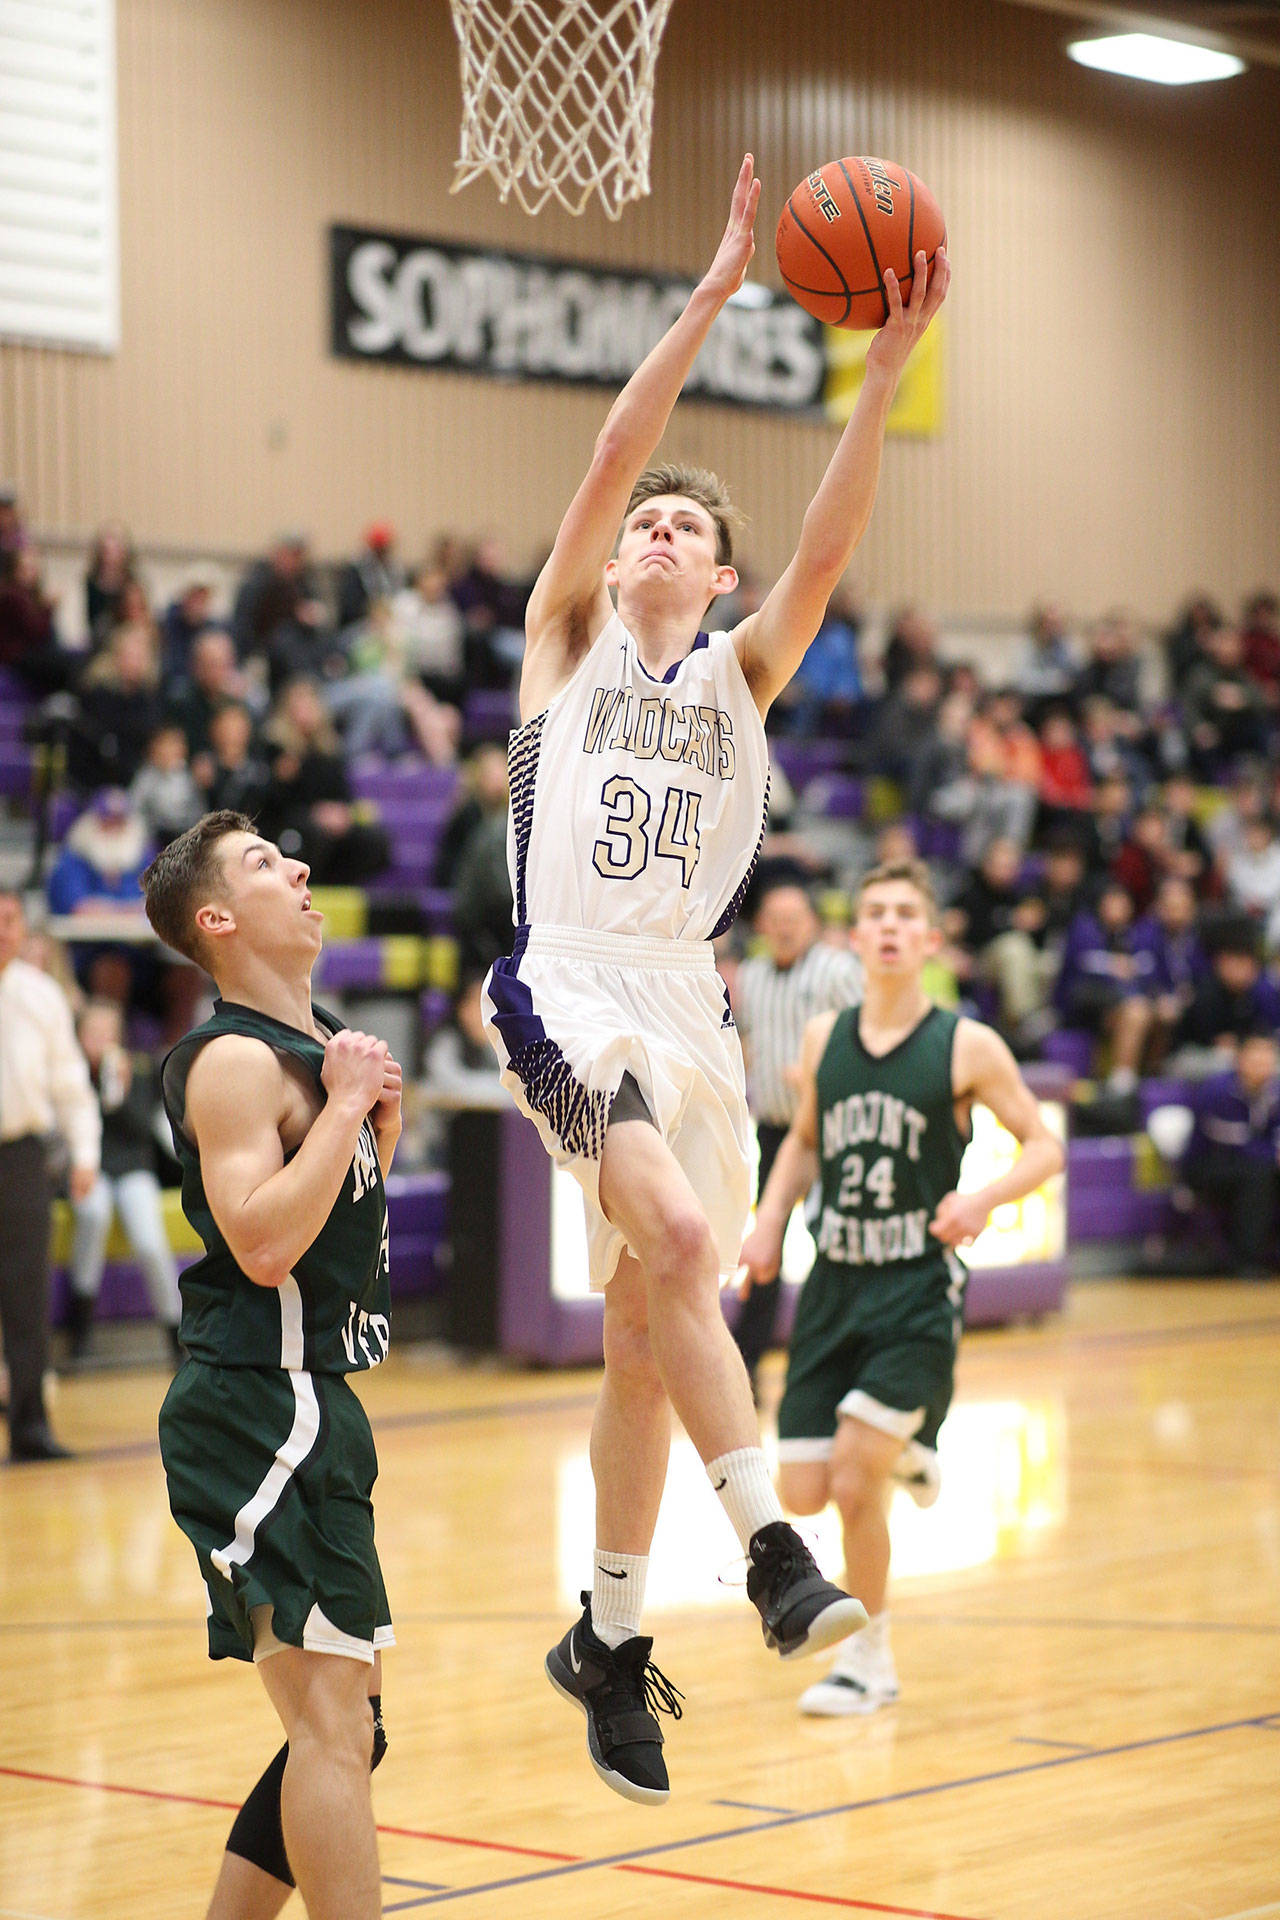 Kevin Schuldt scores 2 of his 7 first-quarter points against Mount Vernon Friday.(Photo by John Fisken)